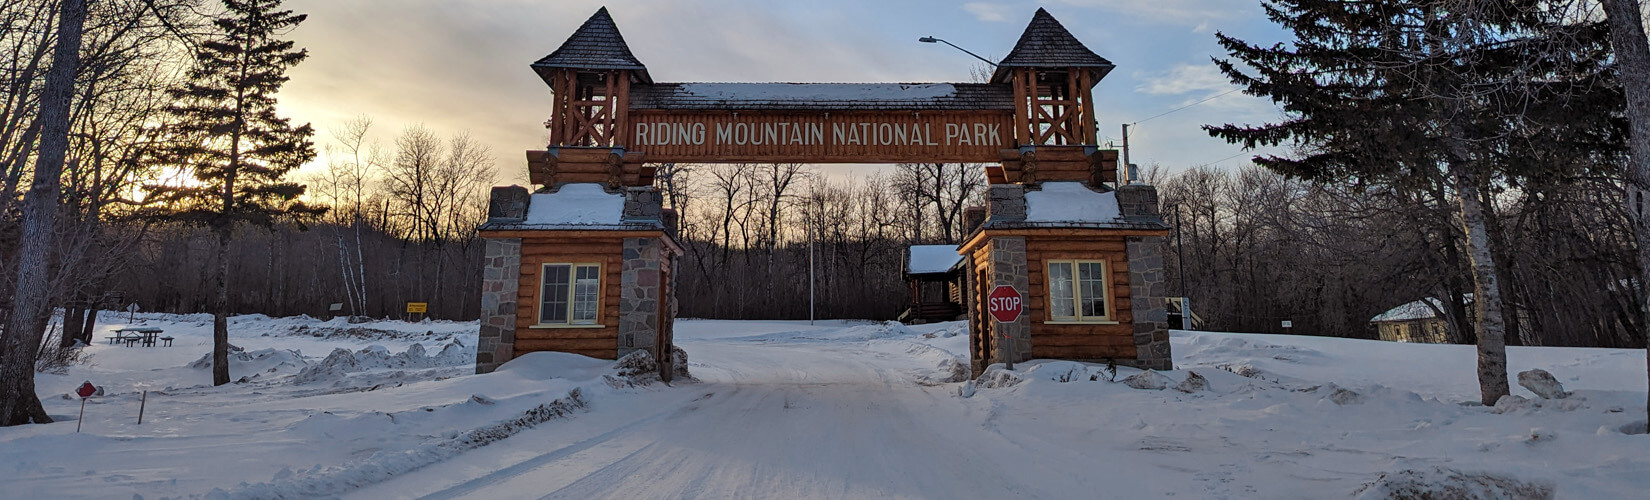 10+ Winter-ful Things to Do in Riding Mountain National Park :: I've Been Bit! Travel Blog